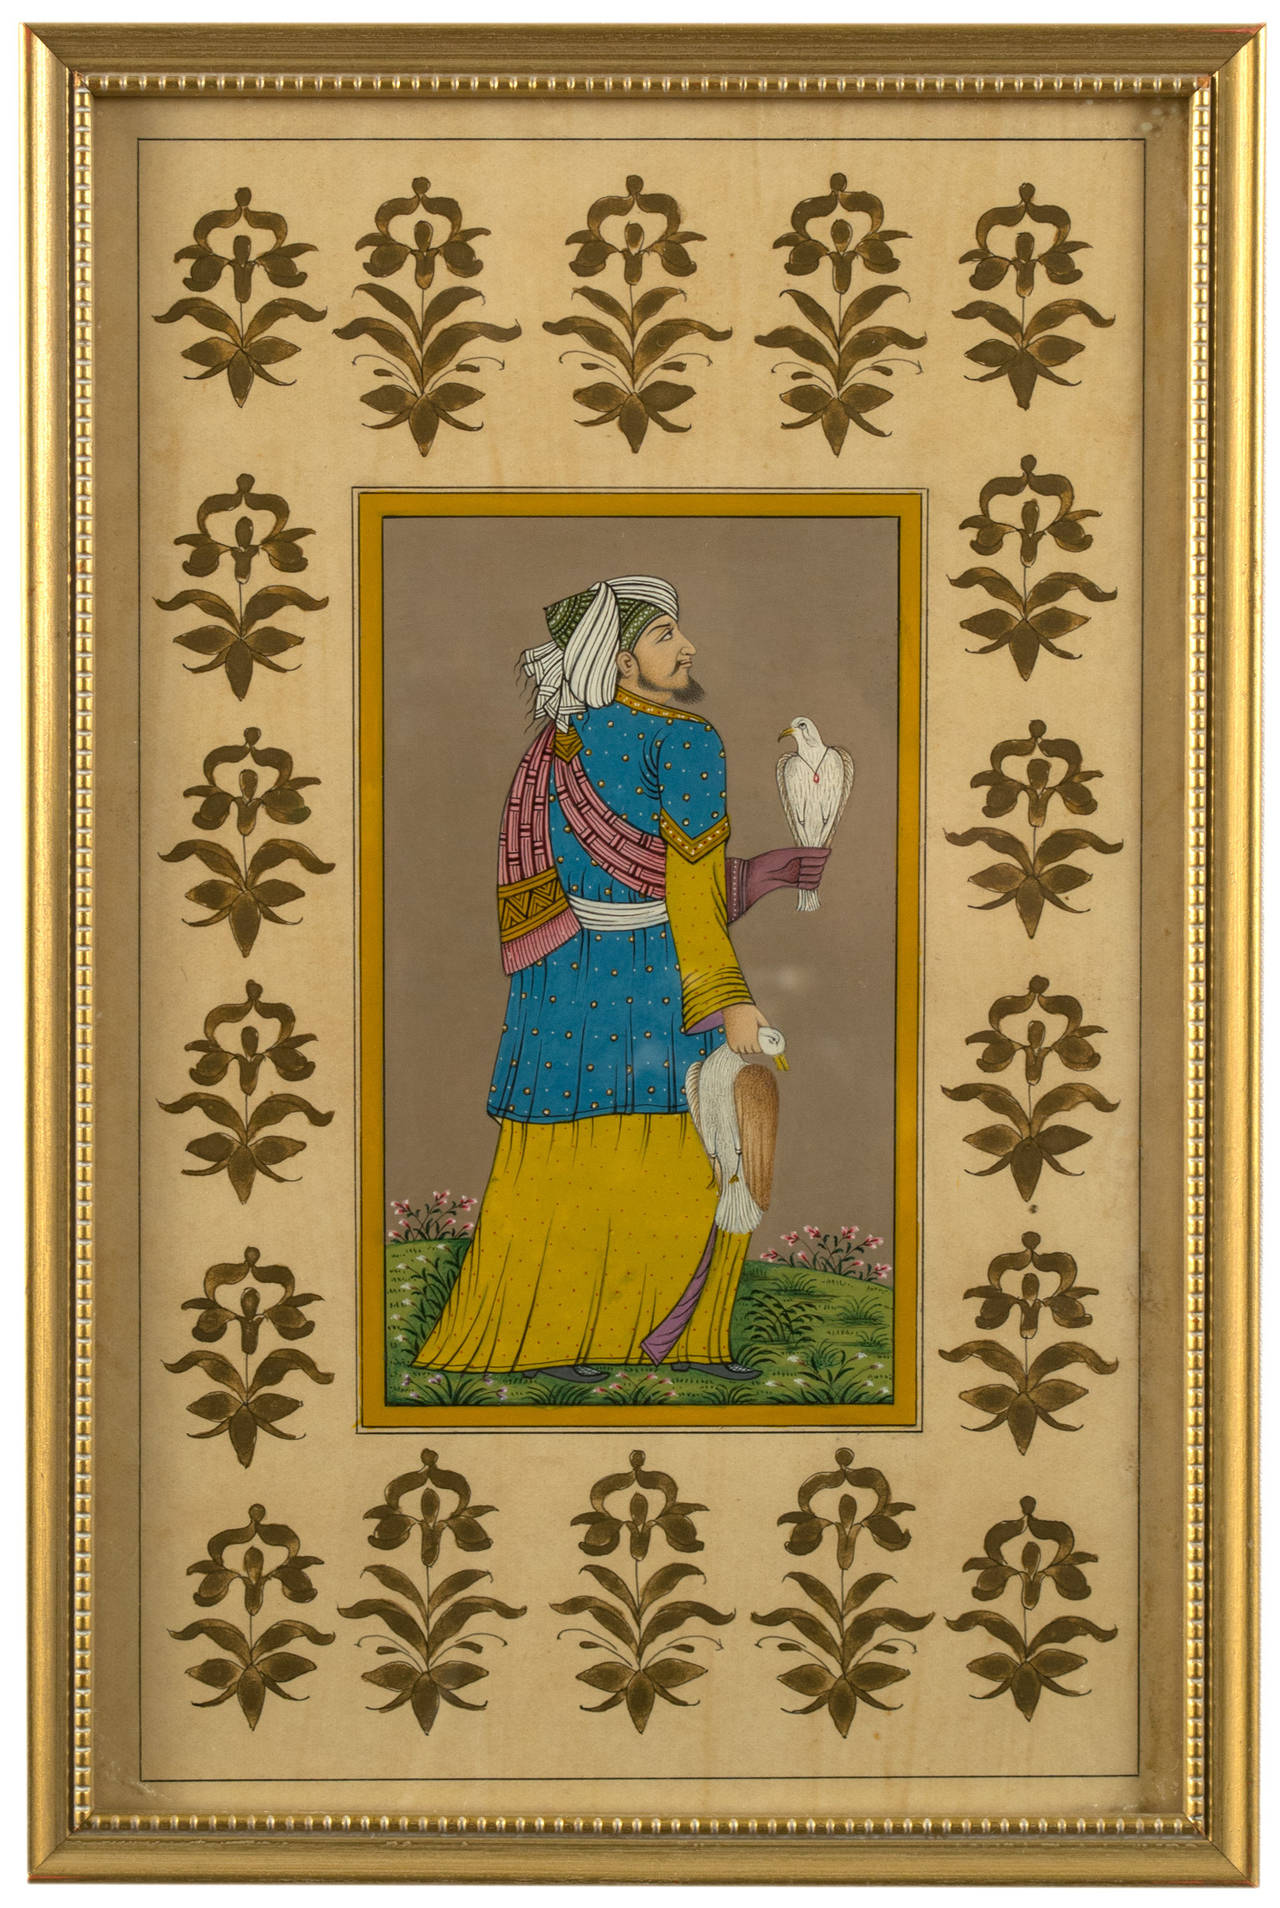 Four paintings, made in Lahore, each depicting key religious and political figures from the Mughal empire; painted with rich, jewel-like colors and embellished with gold painted borders.
Framed: 12.75